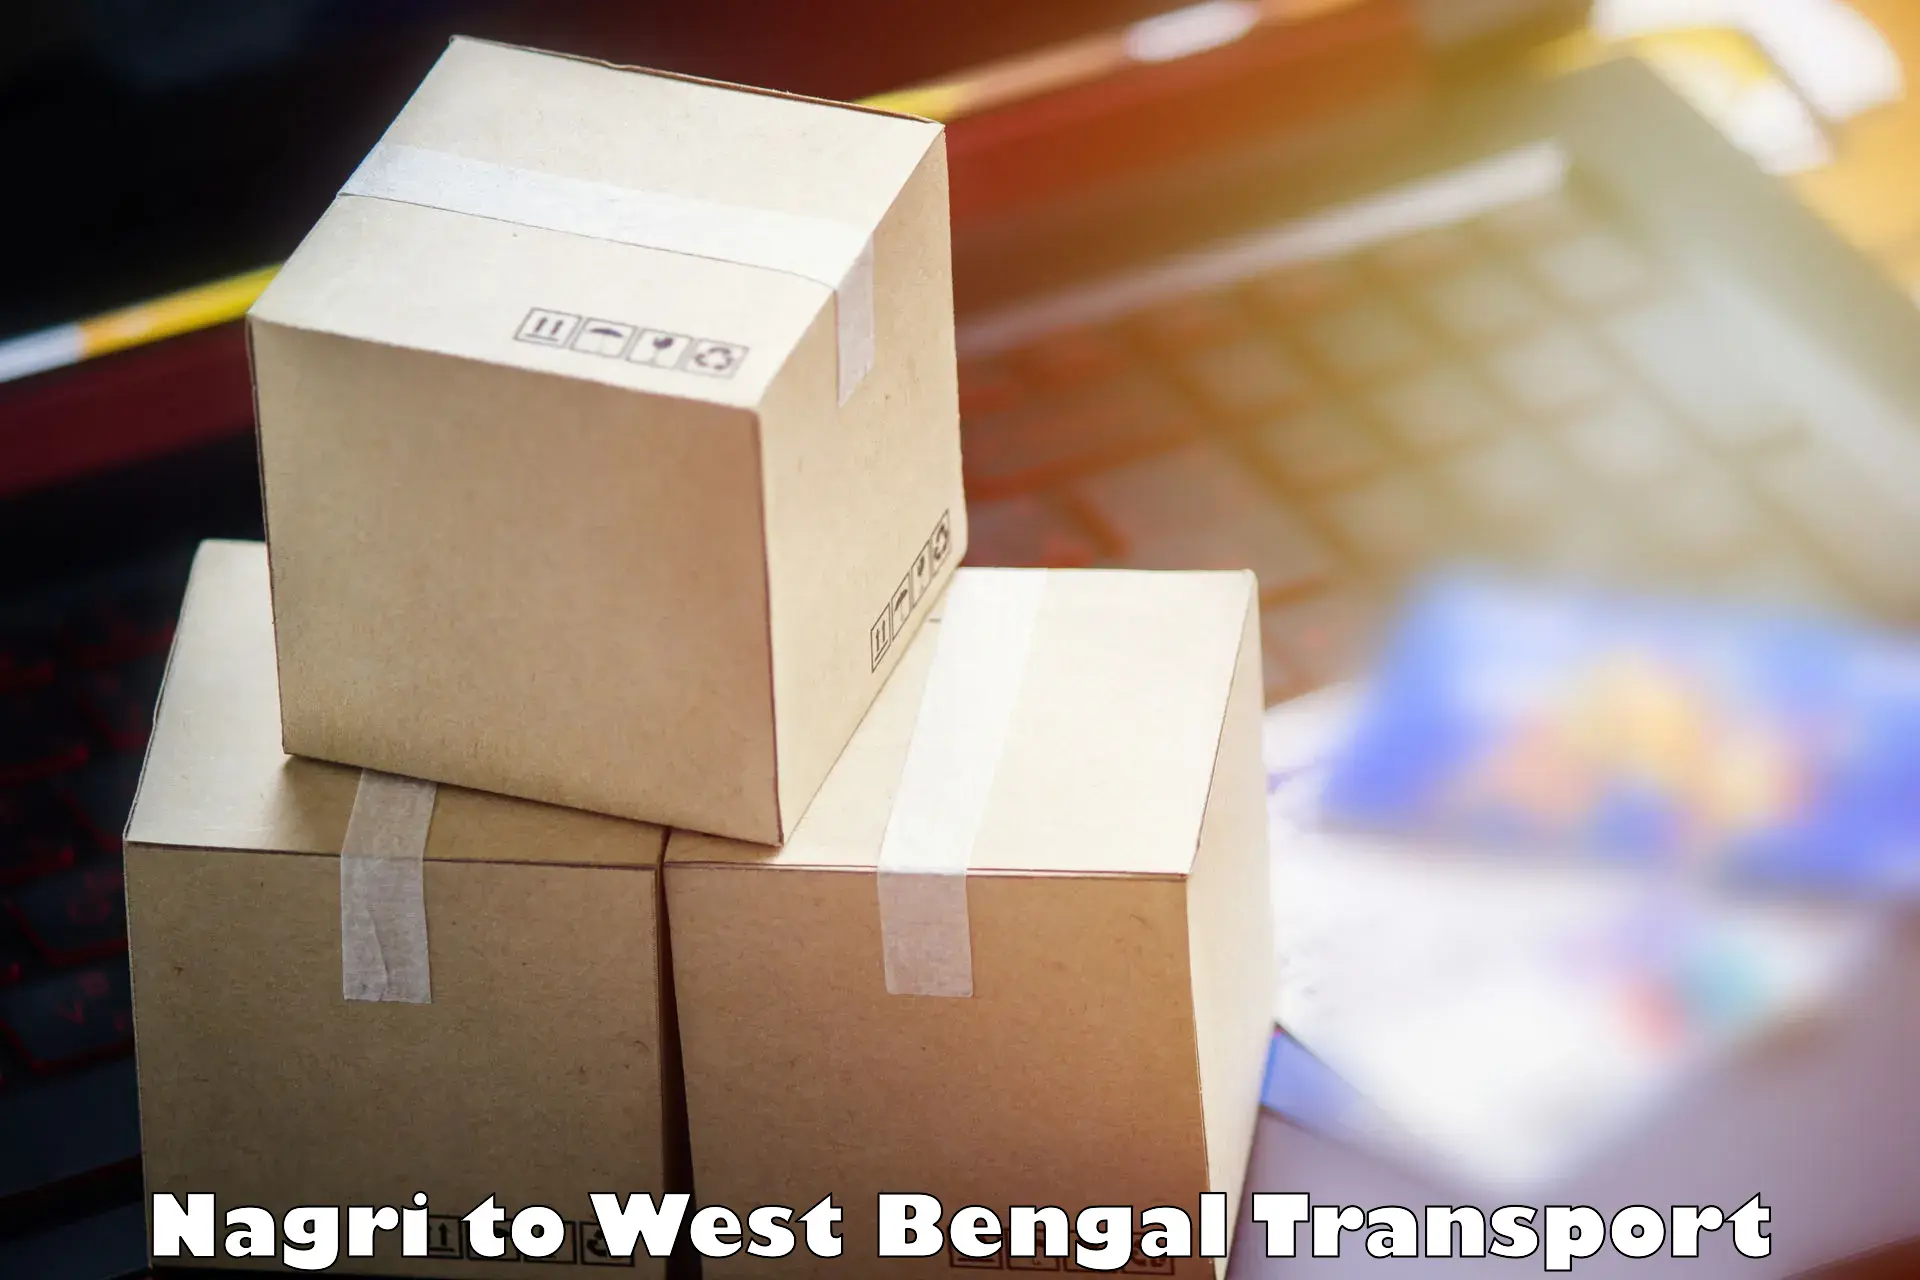 Truck transport companies in India Nagri to Egra